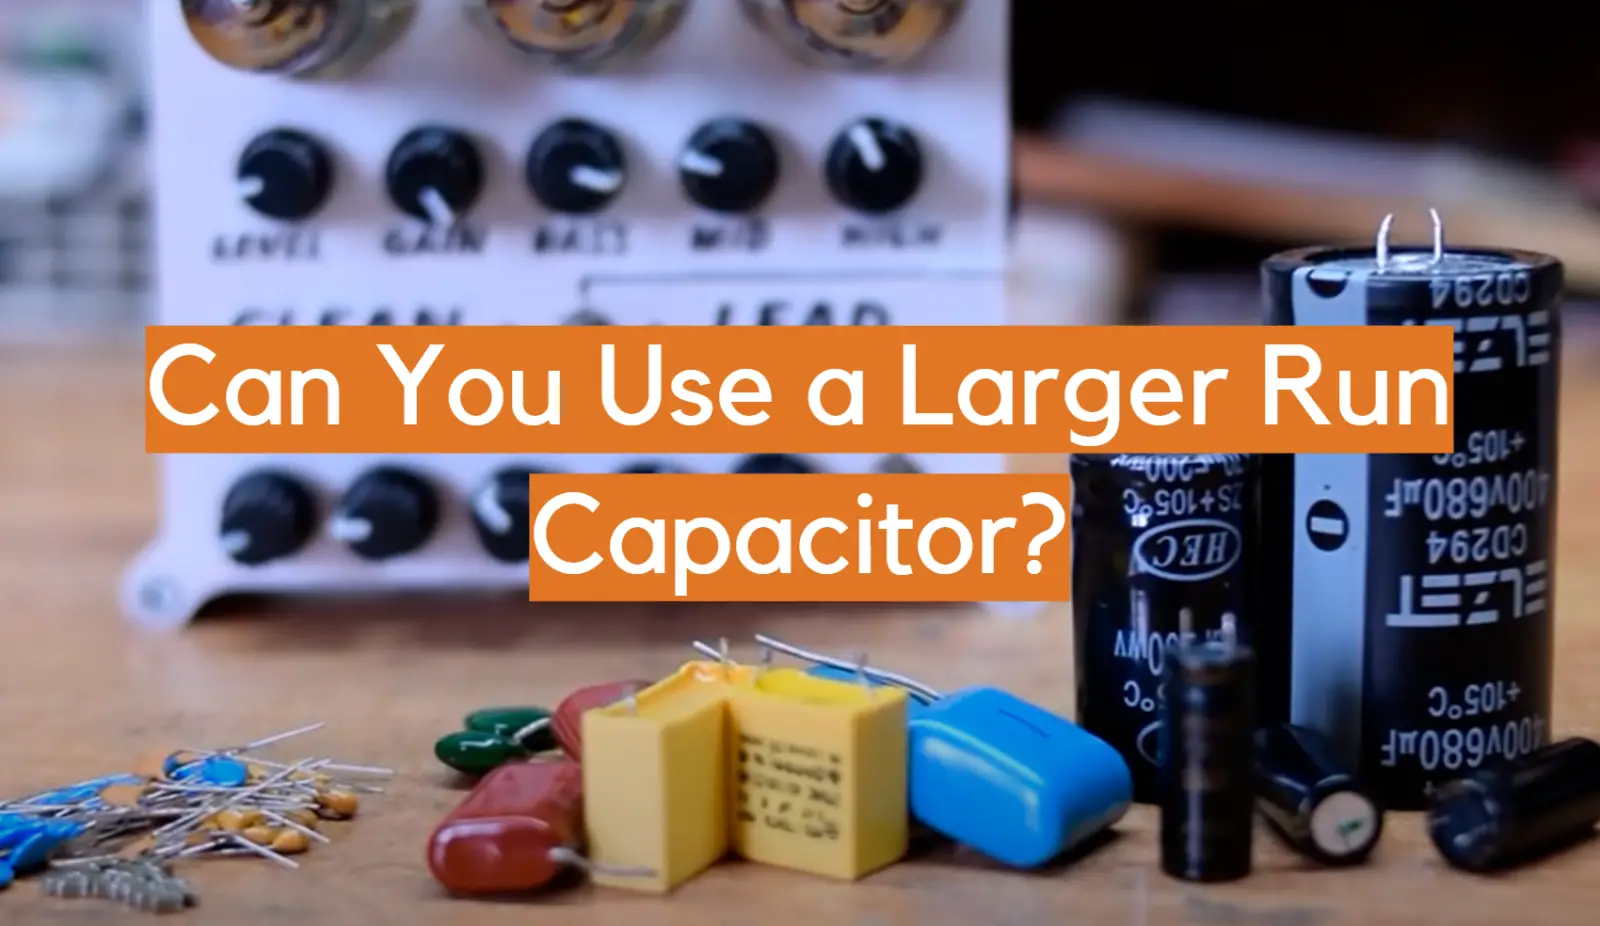 Can You Use a Larger Run Capacitor?